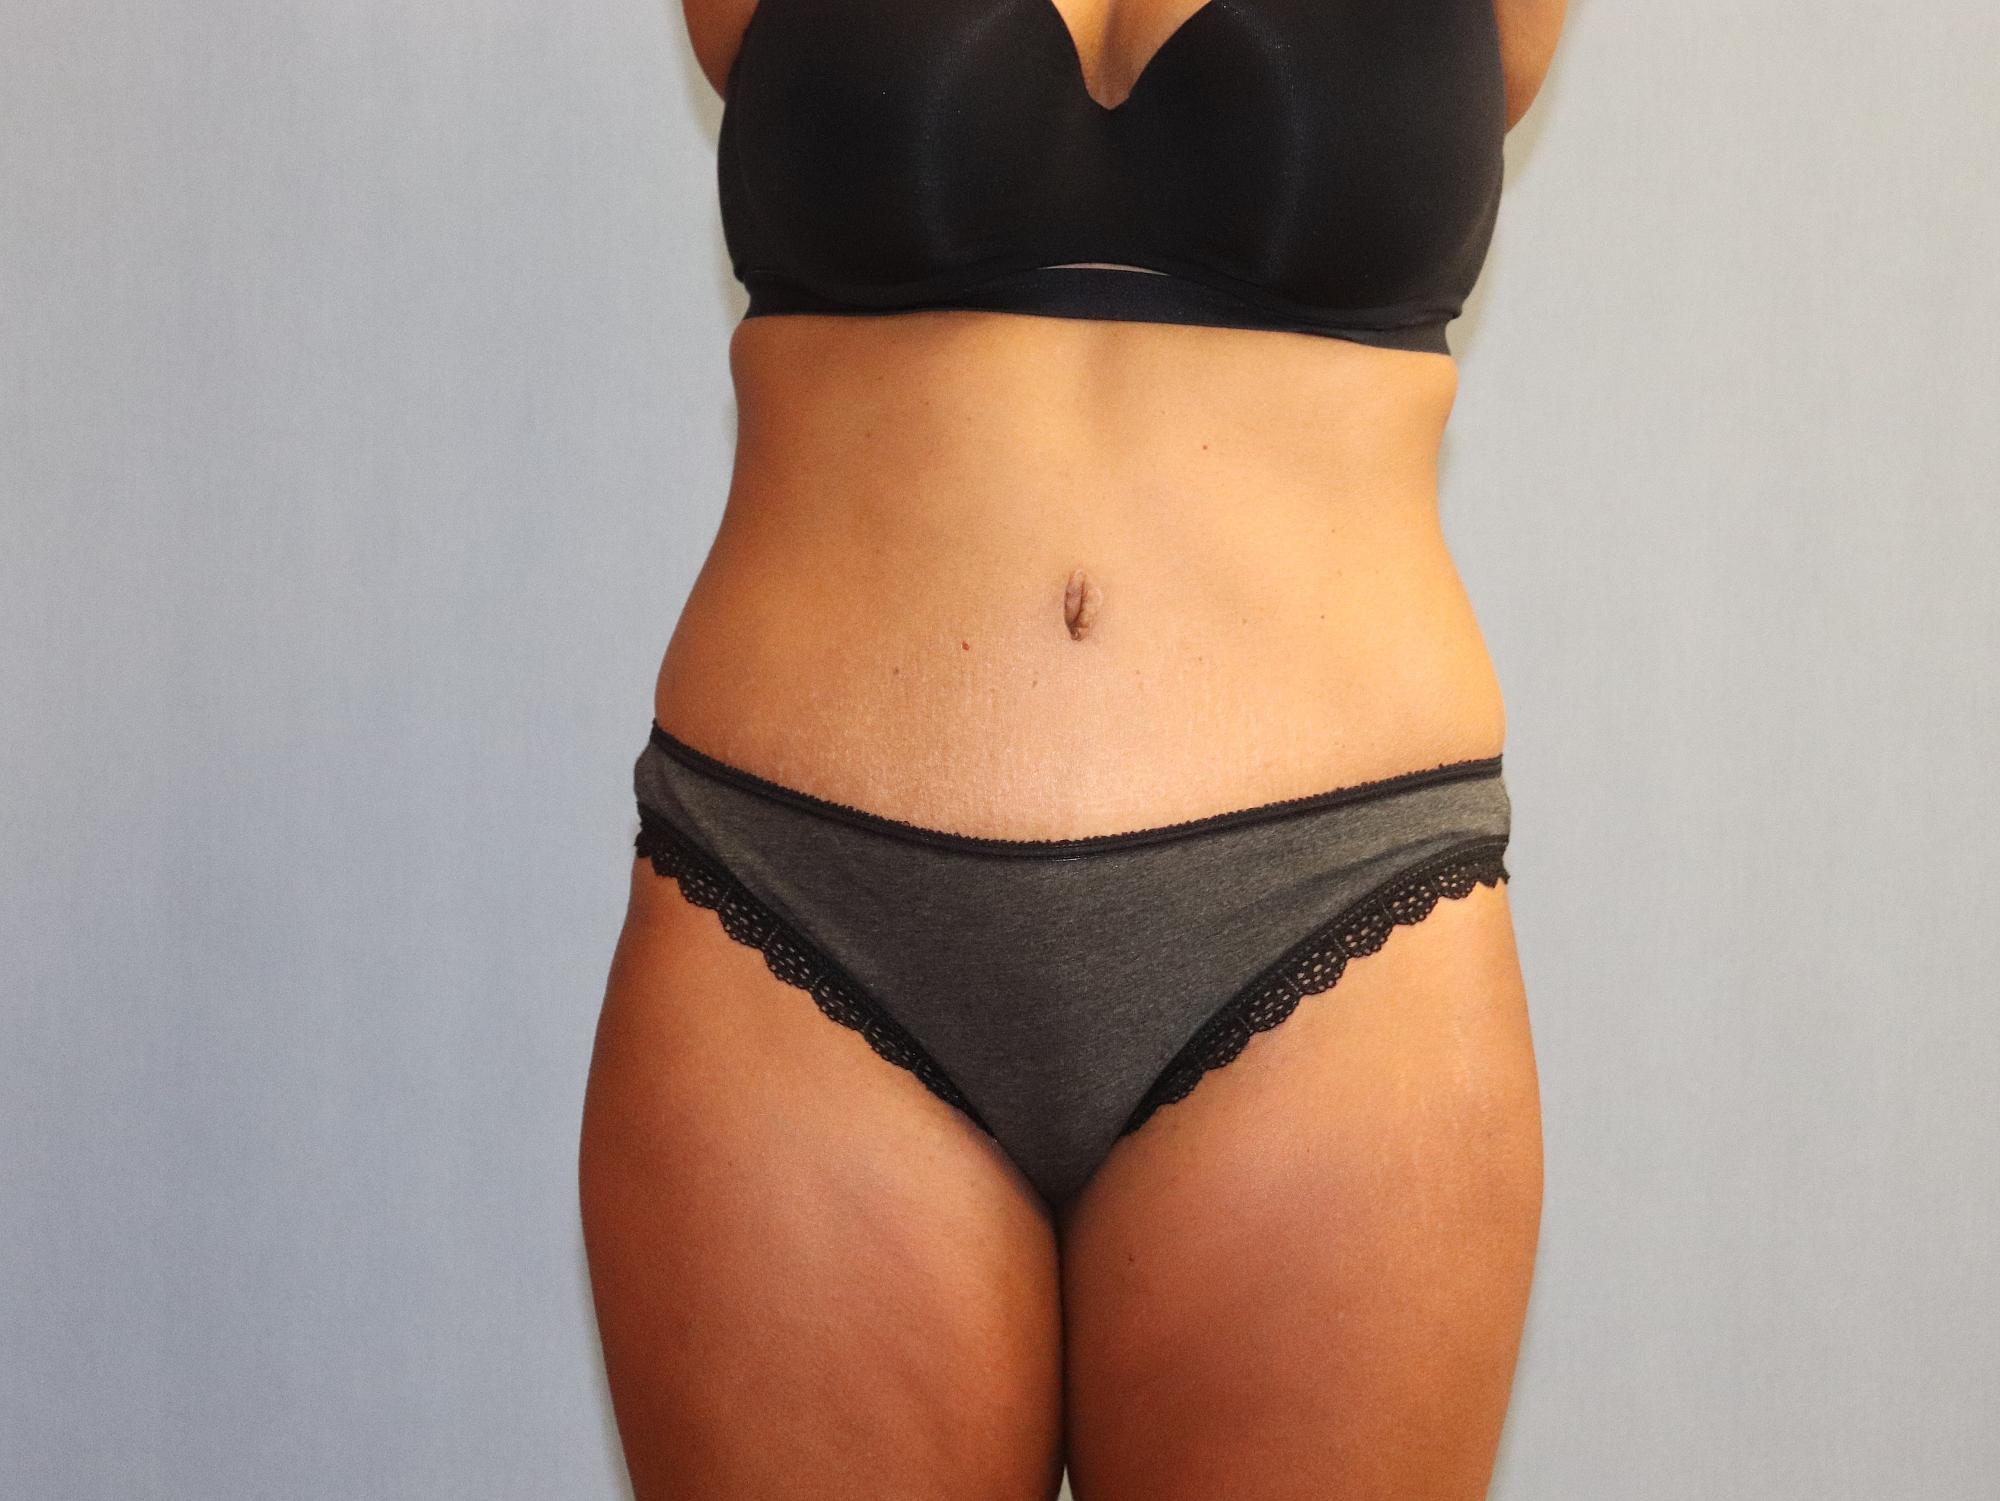 Abdominoplasty & Liposuction of Posterior Hips Before And After Patient 46